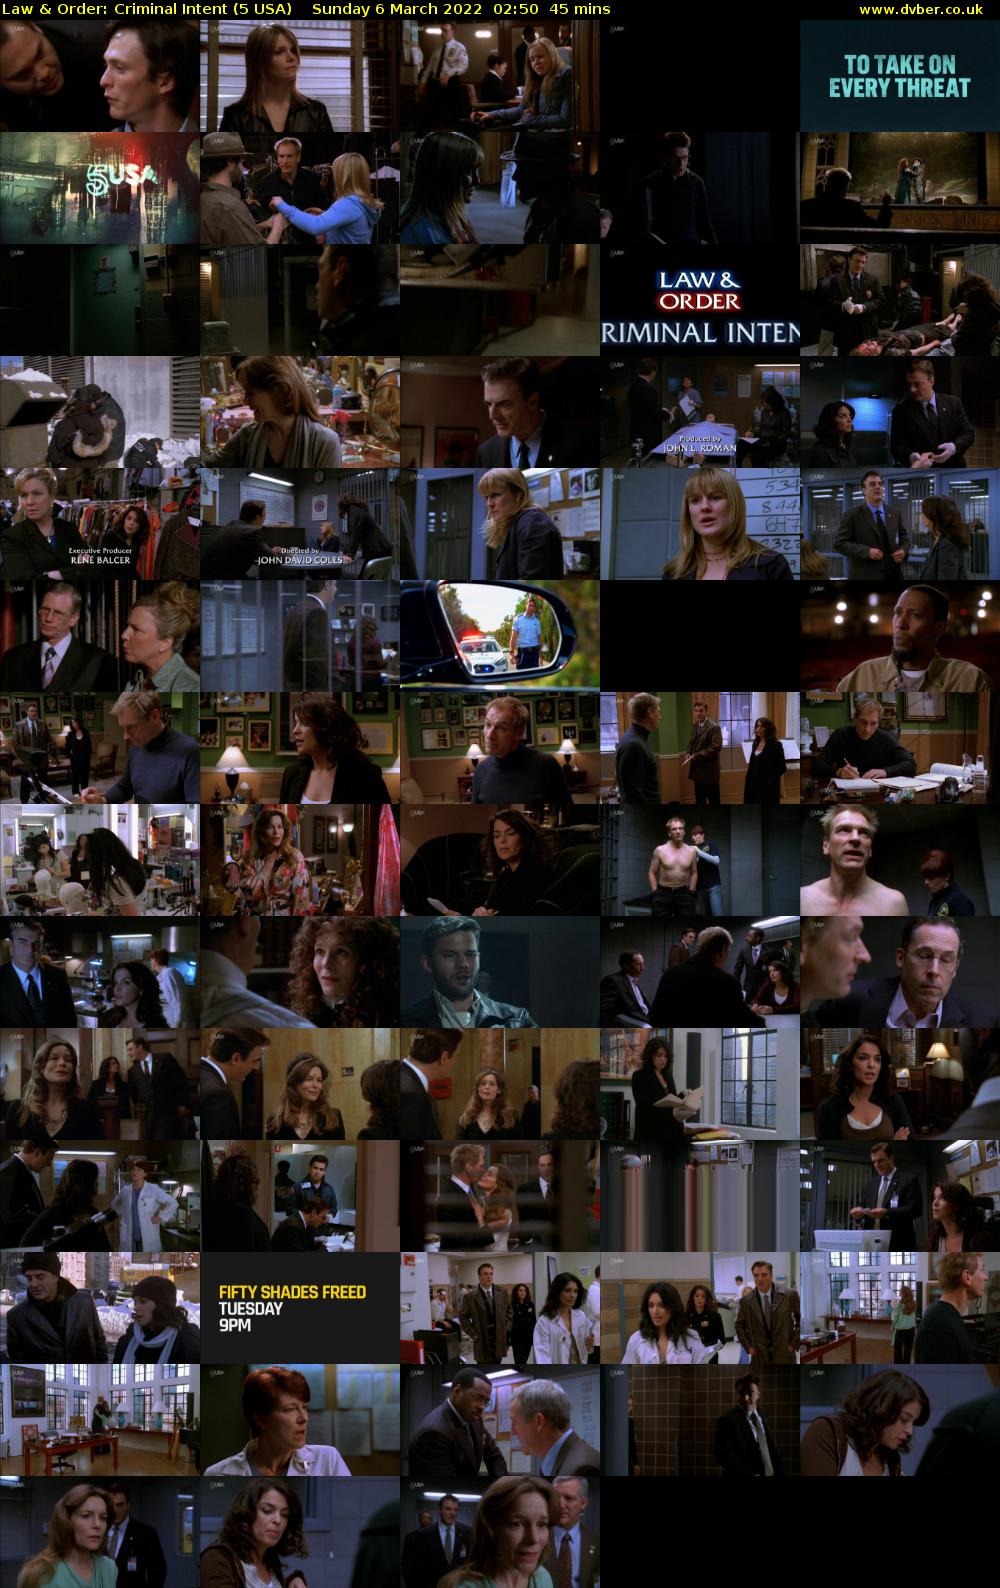 Law & Order: Criminal Intent (5 USA) Sunday 6 March 2022 02:50 - 03:35